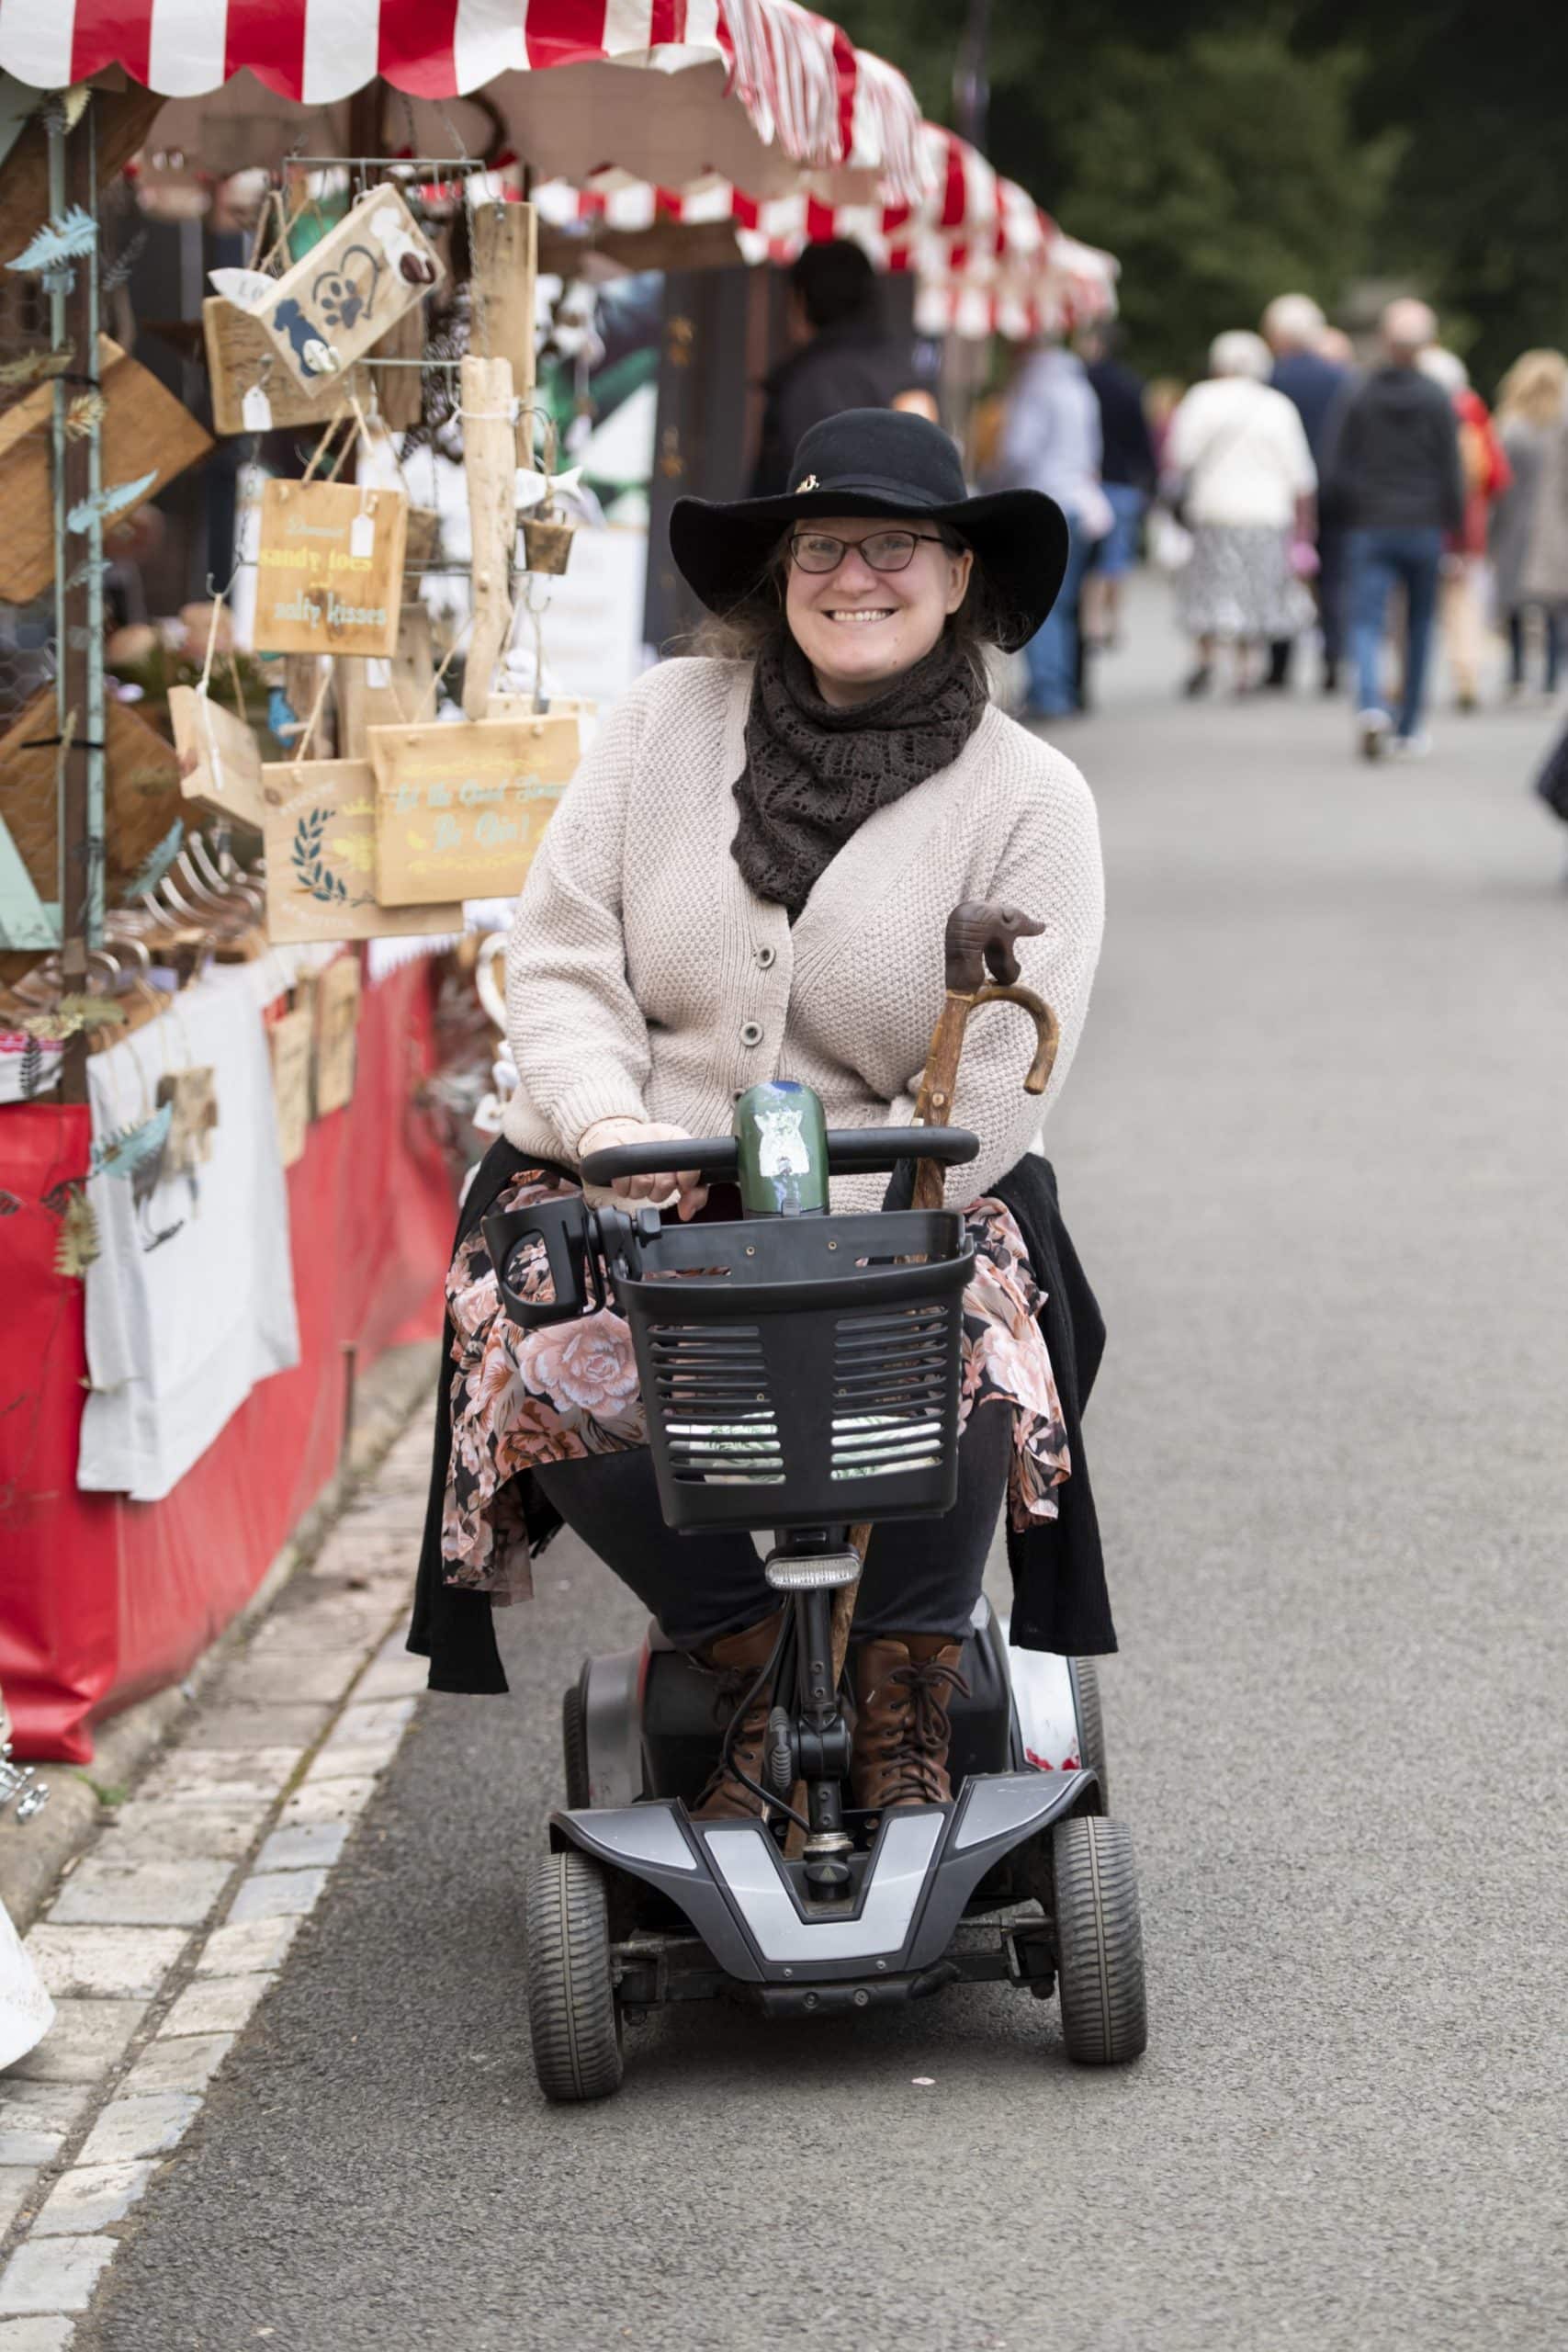 Visitor on a motorised scooter at Raby Castle's summer market